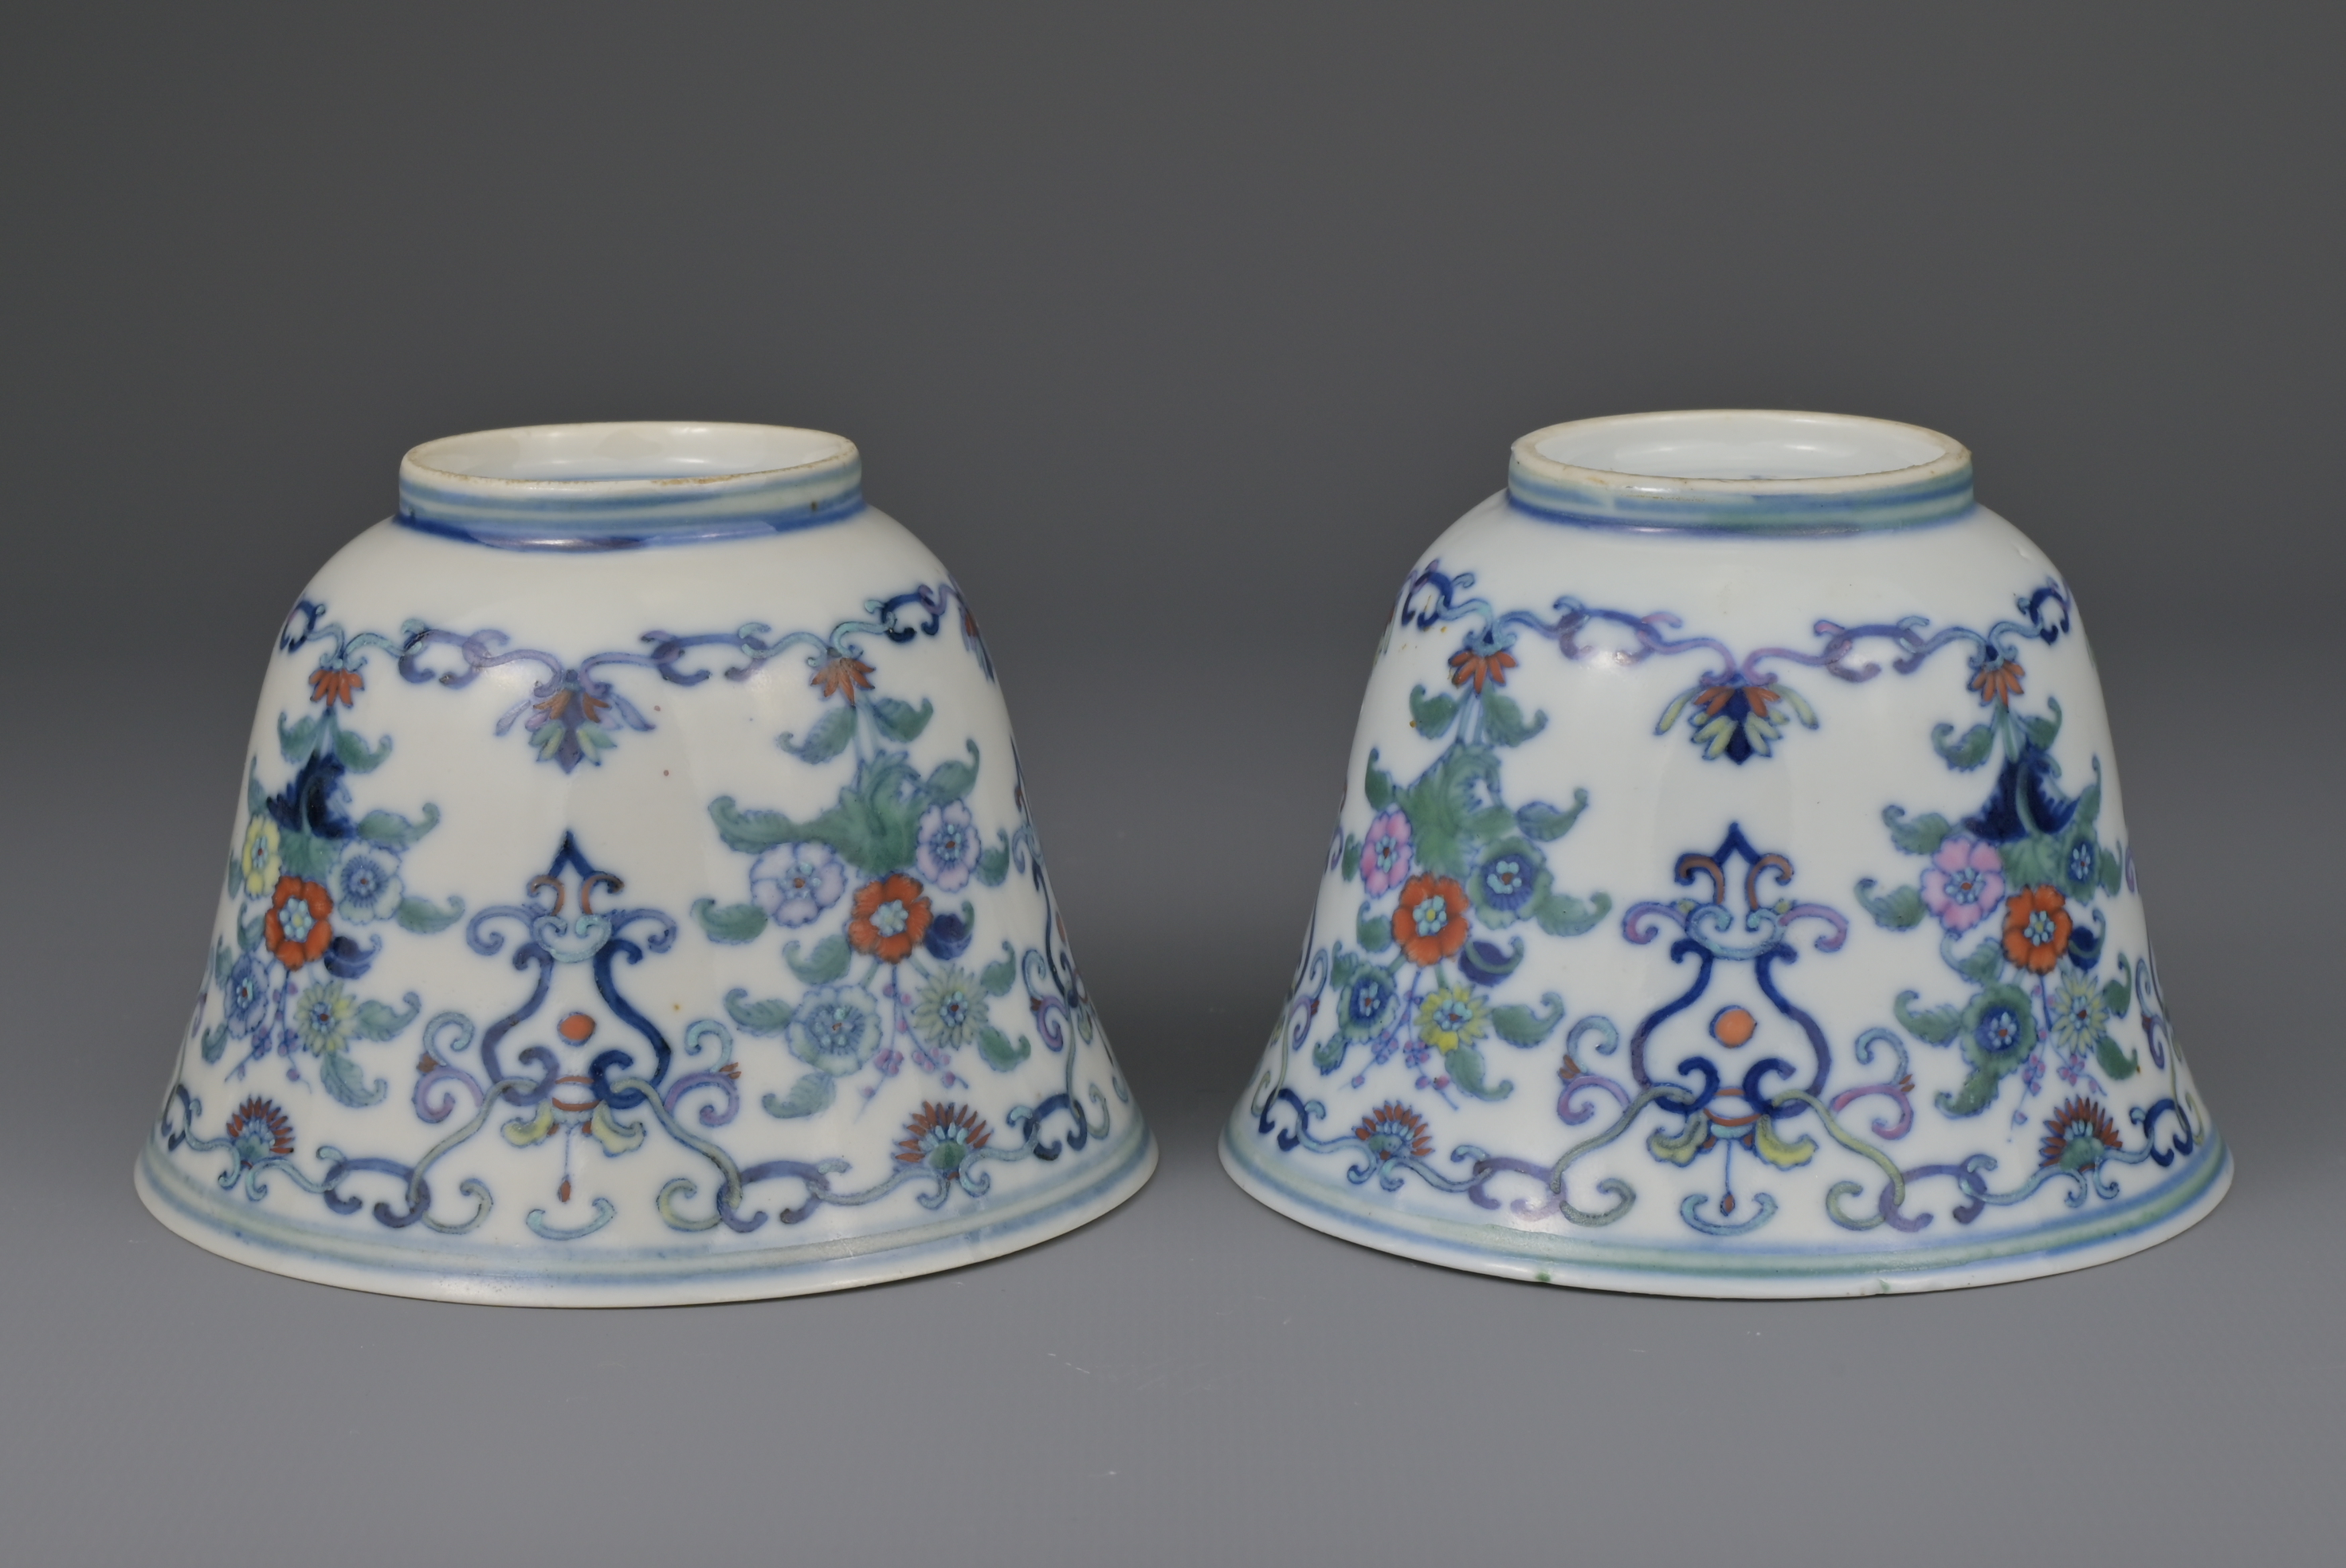 FINE PAIR OF CHINESE DOUCAI PORCELAIN WINE CUPS, YONGZHENG MARK AND PERIOD, 18th CENTURY - Image 6 of 8